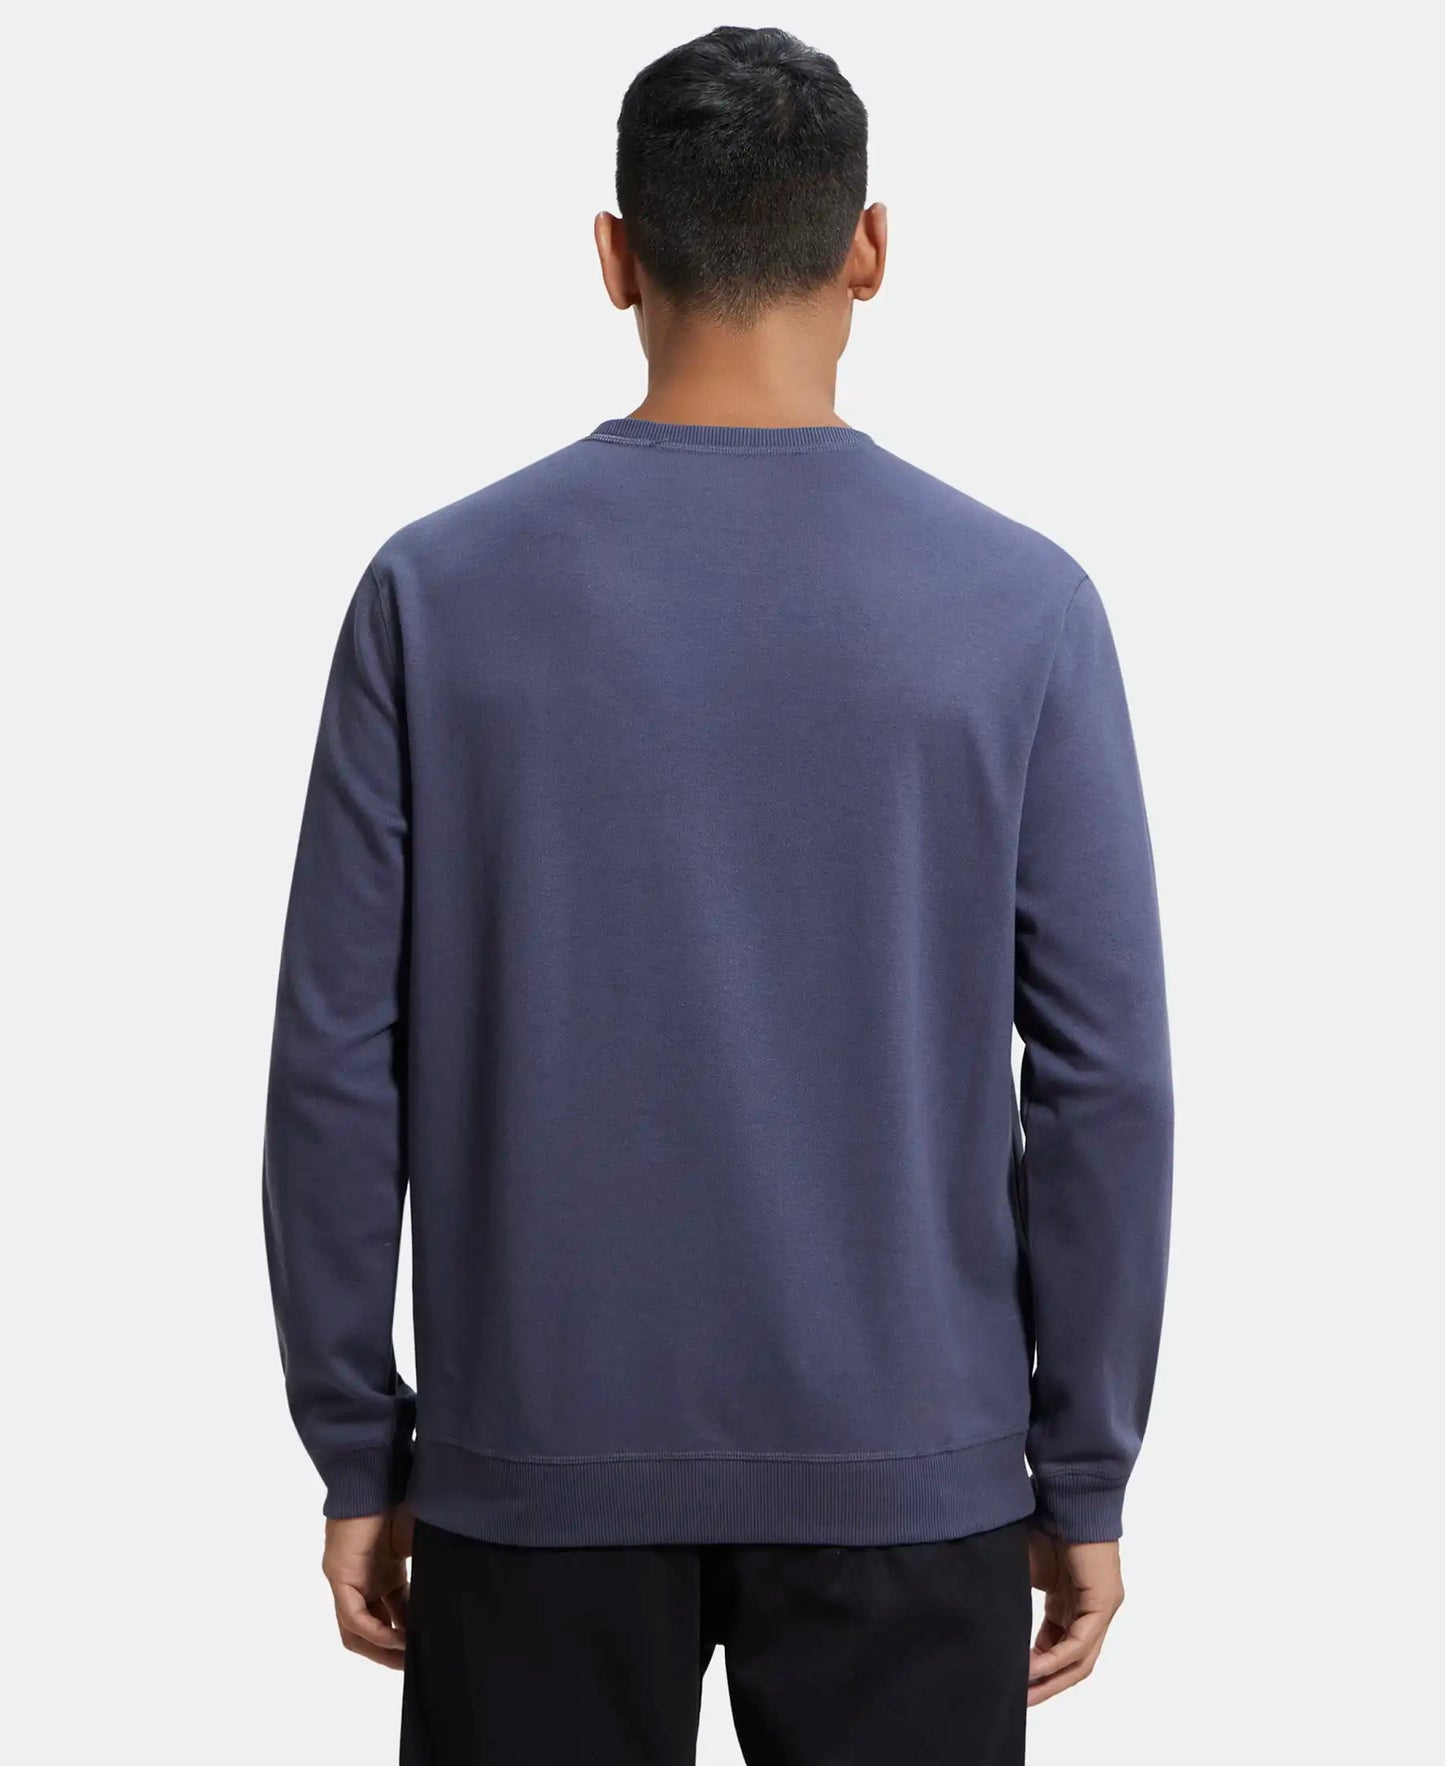 Super Combed Cotton Rich Pique Sweatshirt with Ribbed Cuffs - Odyssey grey-3